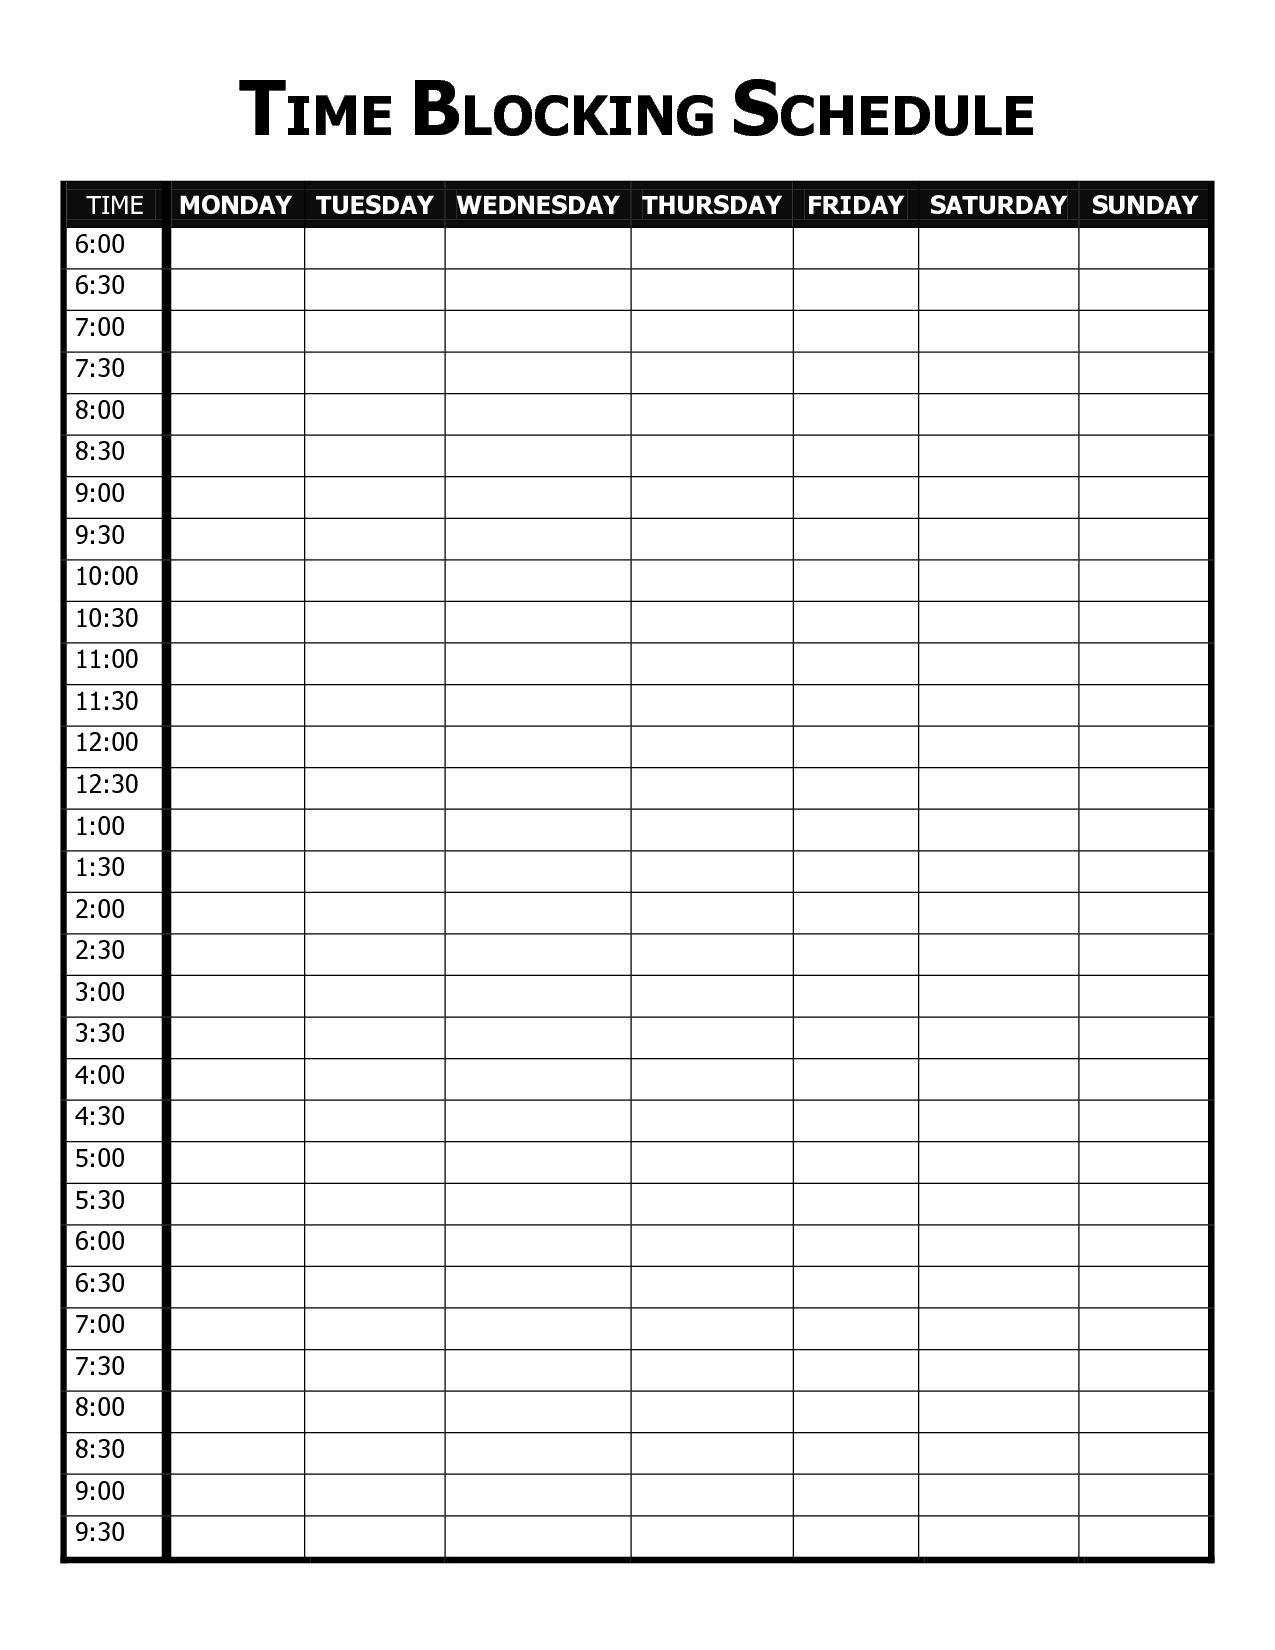 Perfect Black Calendar Template For Blocking Time In A Day Time And Date Calendars Printable